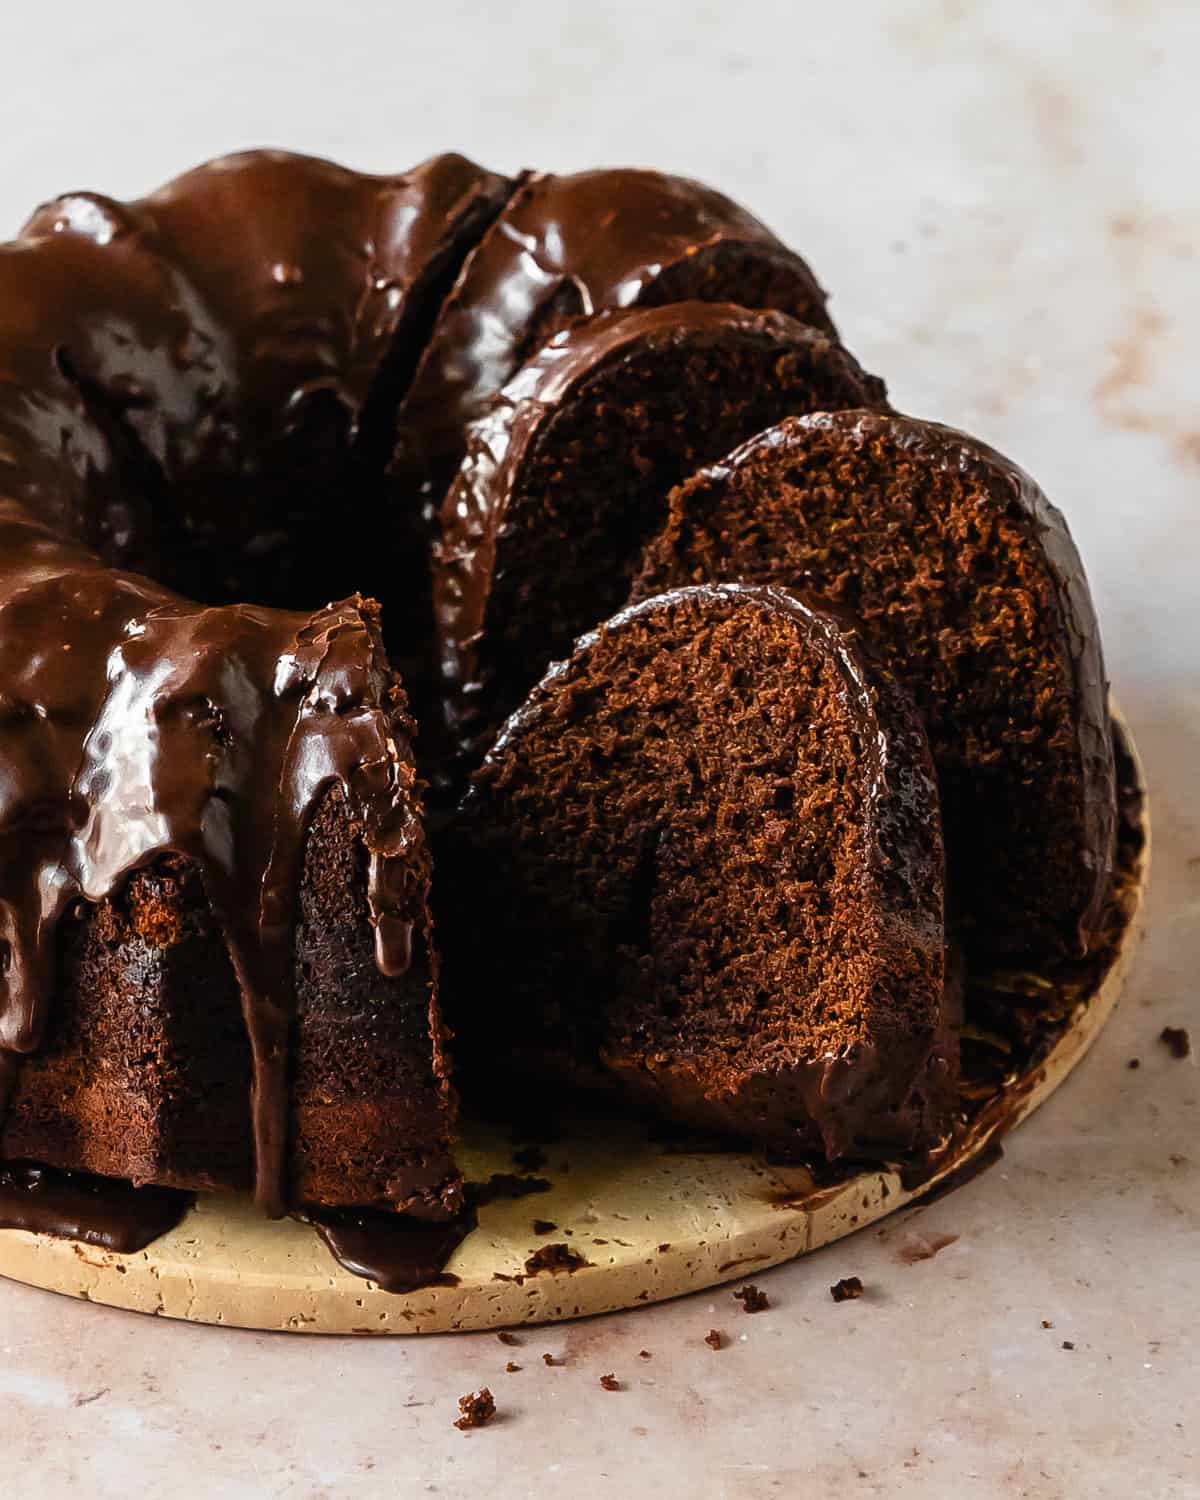 Chocolate pound cake is a moist and velvety old fashioned chocolate pound cake. Top with this chocolate bundt cake with a deliciously decadent chocolate glaze for even more rich chocolate flavor. This easy to make double chocolate pound cake makes the perfect simple and delicious dessert.